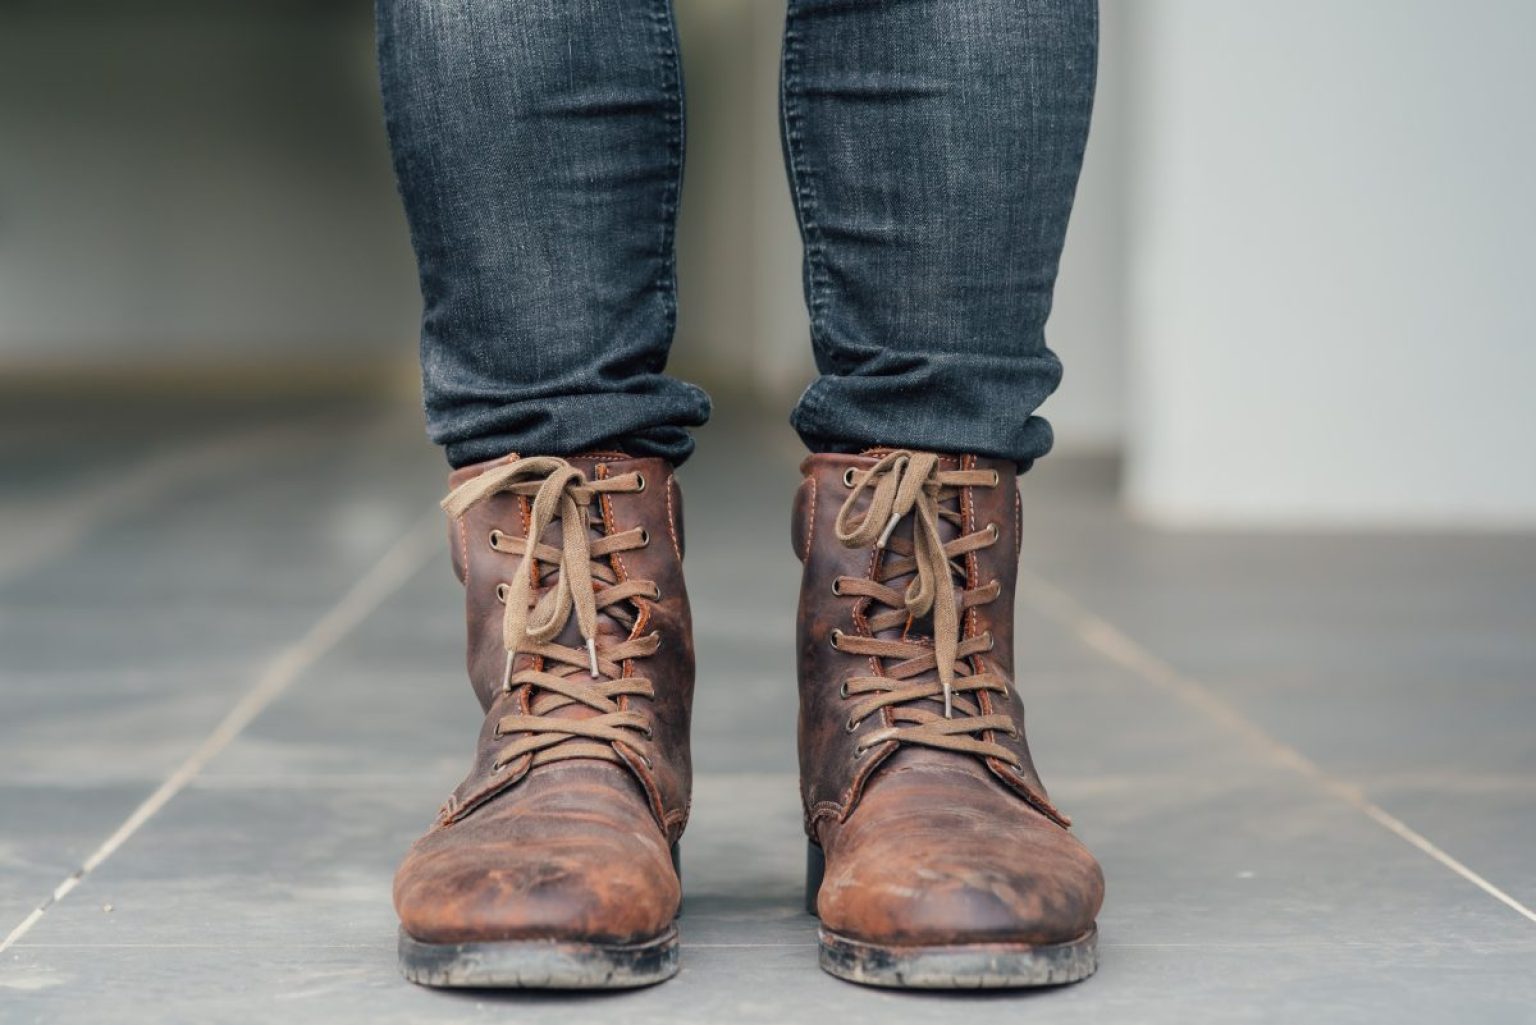 How To Restore Old Leather Boots? - The Shoe Box NYC